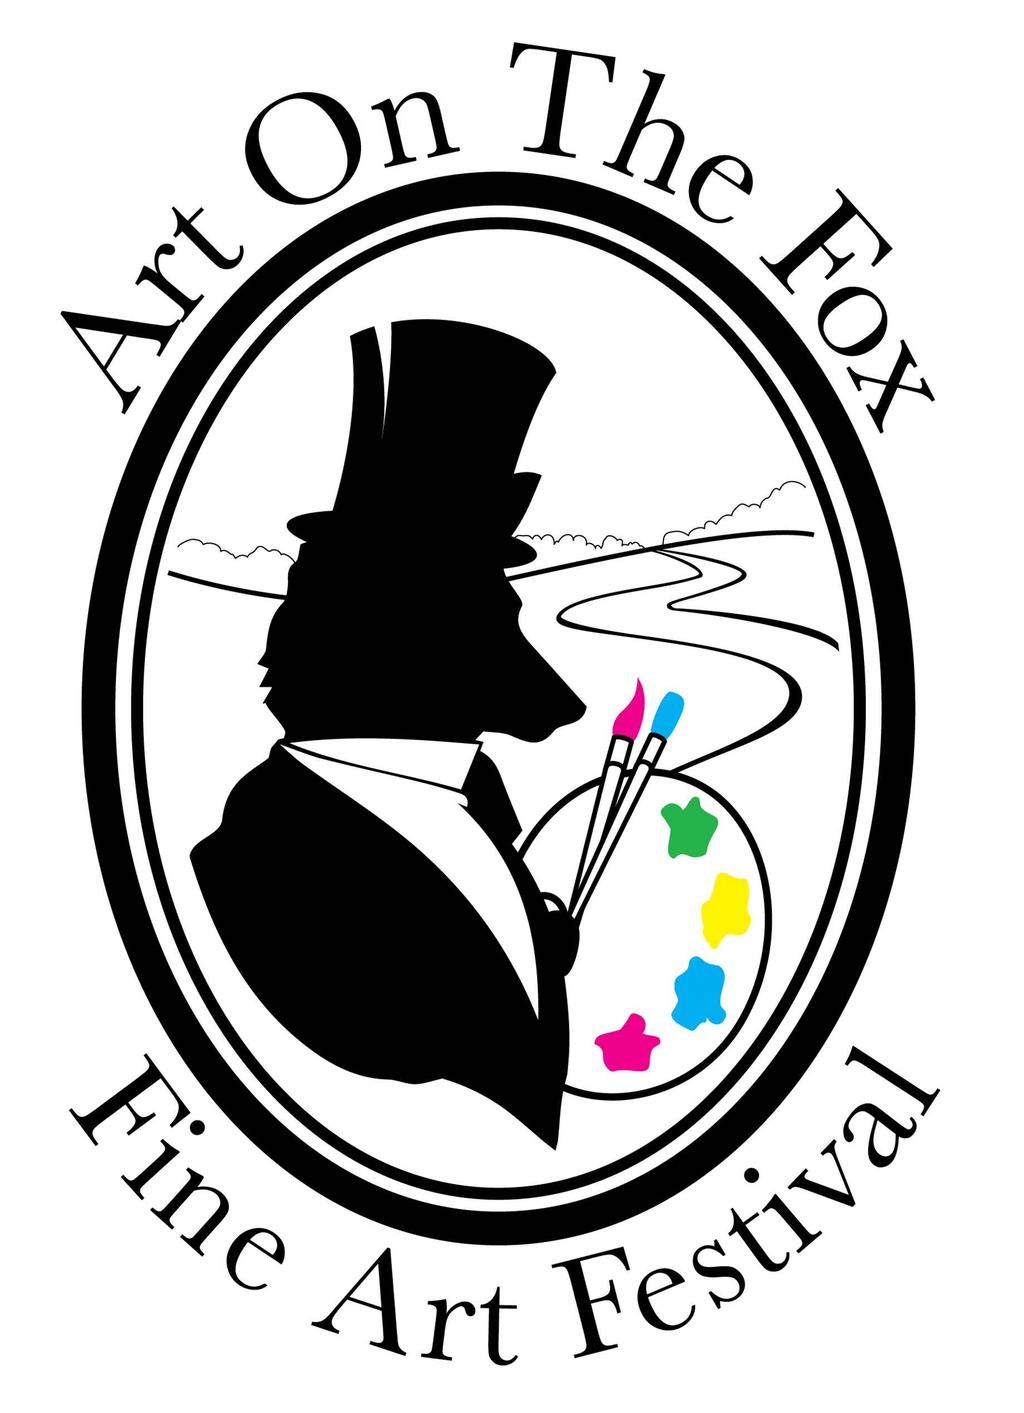 com "The Gem of the Fox River Valley" Algonquin s Art on the Fox is celebrating eleven years in 2018. This Father s Day Weekend show is located at Riverfront Park along the Fox River.